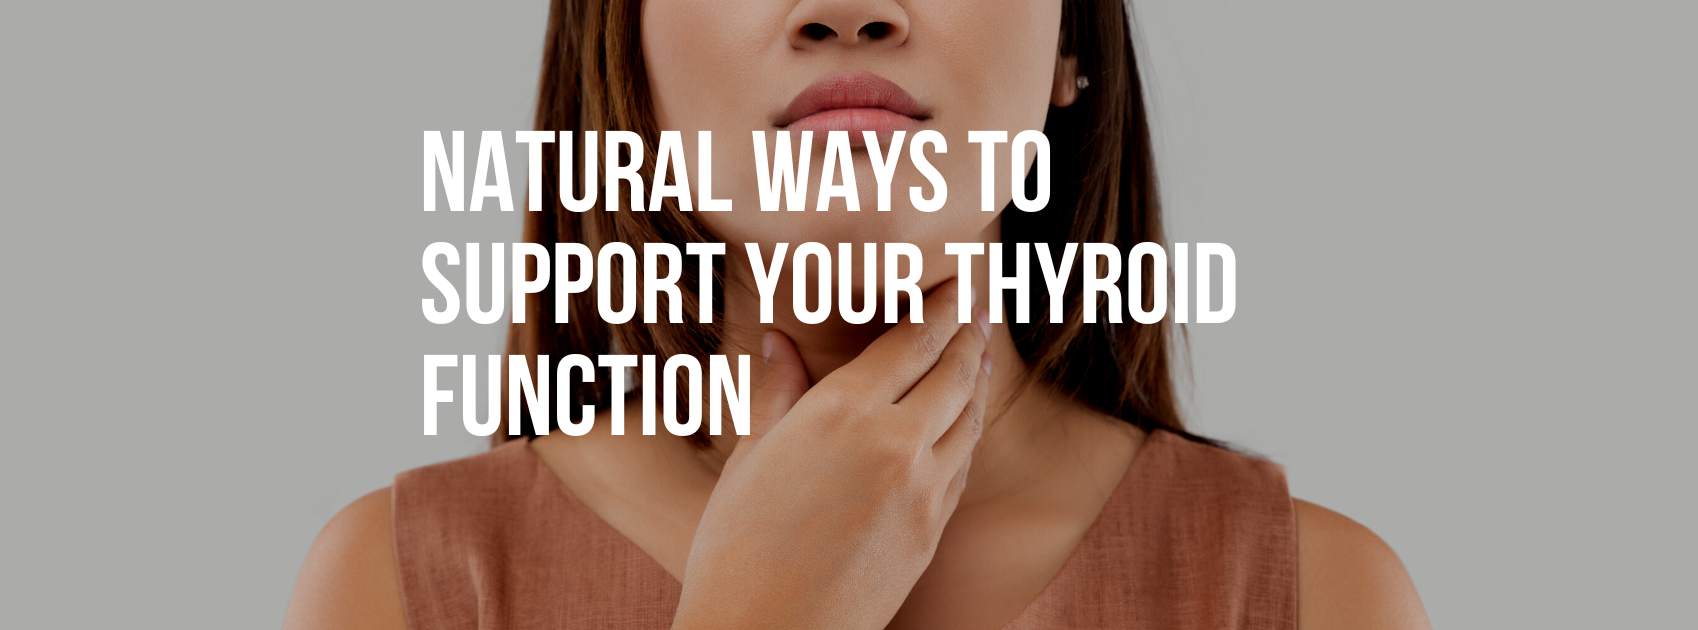 Natural Ways to Support Your Thyroid Function